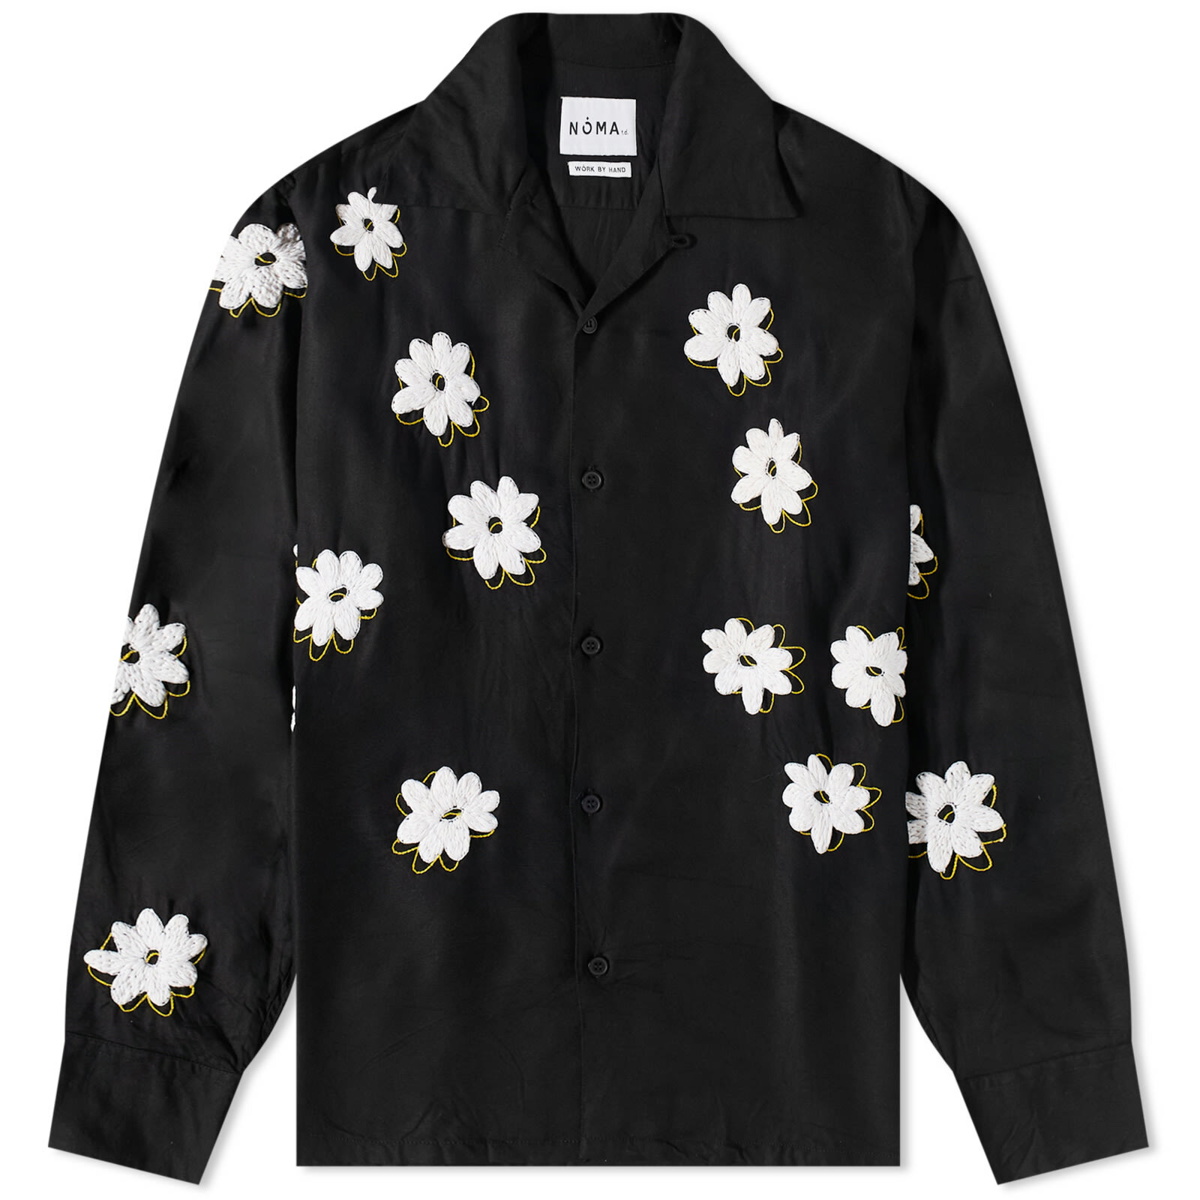 Noma t.d. Men's Floral Hand Embroidery Shirt in Black NOMA t.d.